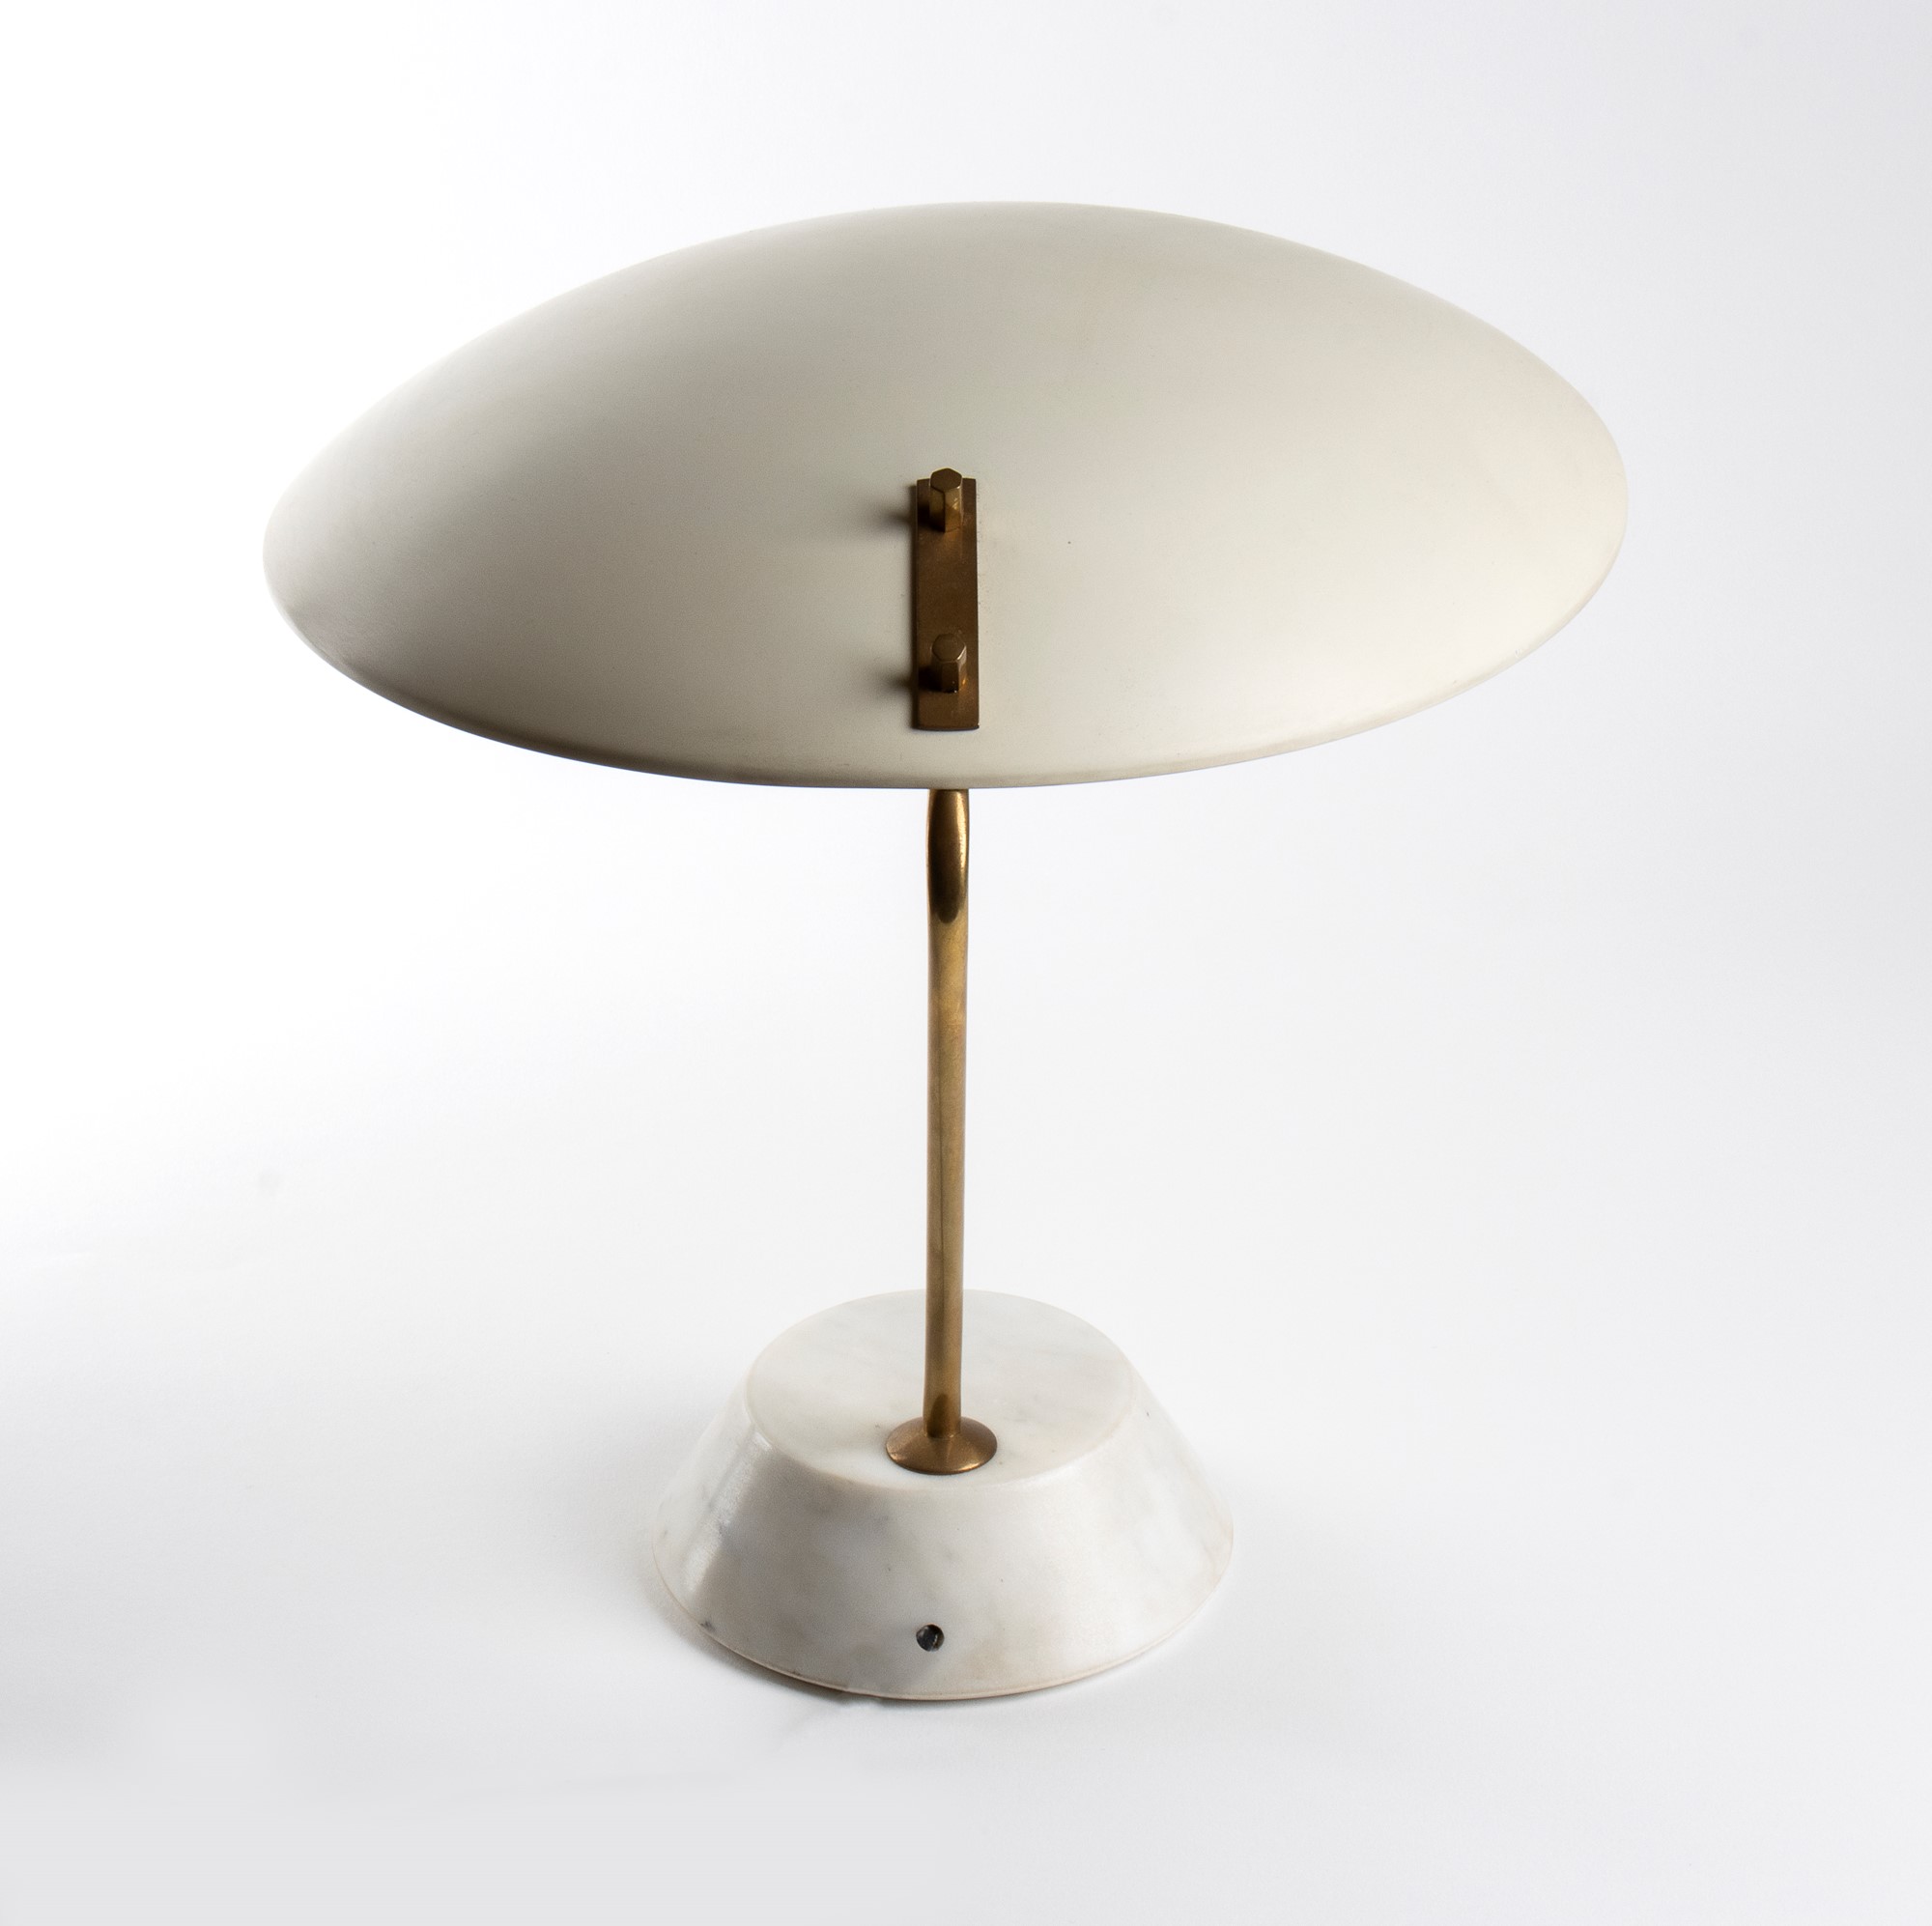 Bruno Gatta Table lamp model 8023 with a light. Cream white metal diffuser, brass stem and marble c - Image 11 of 19